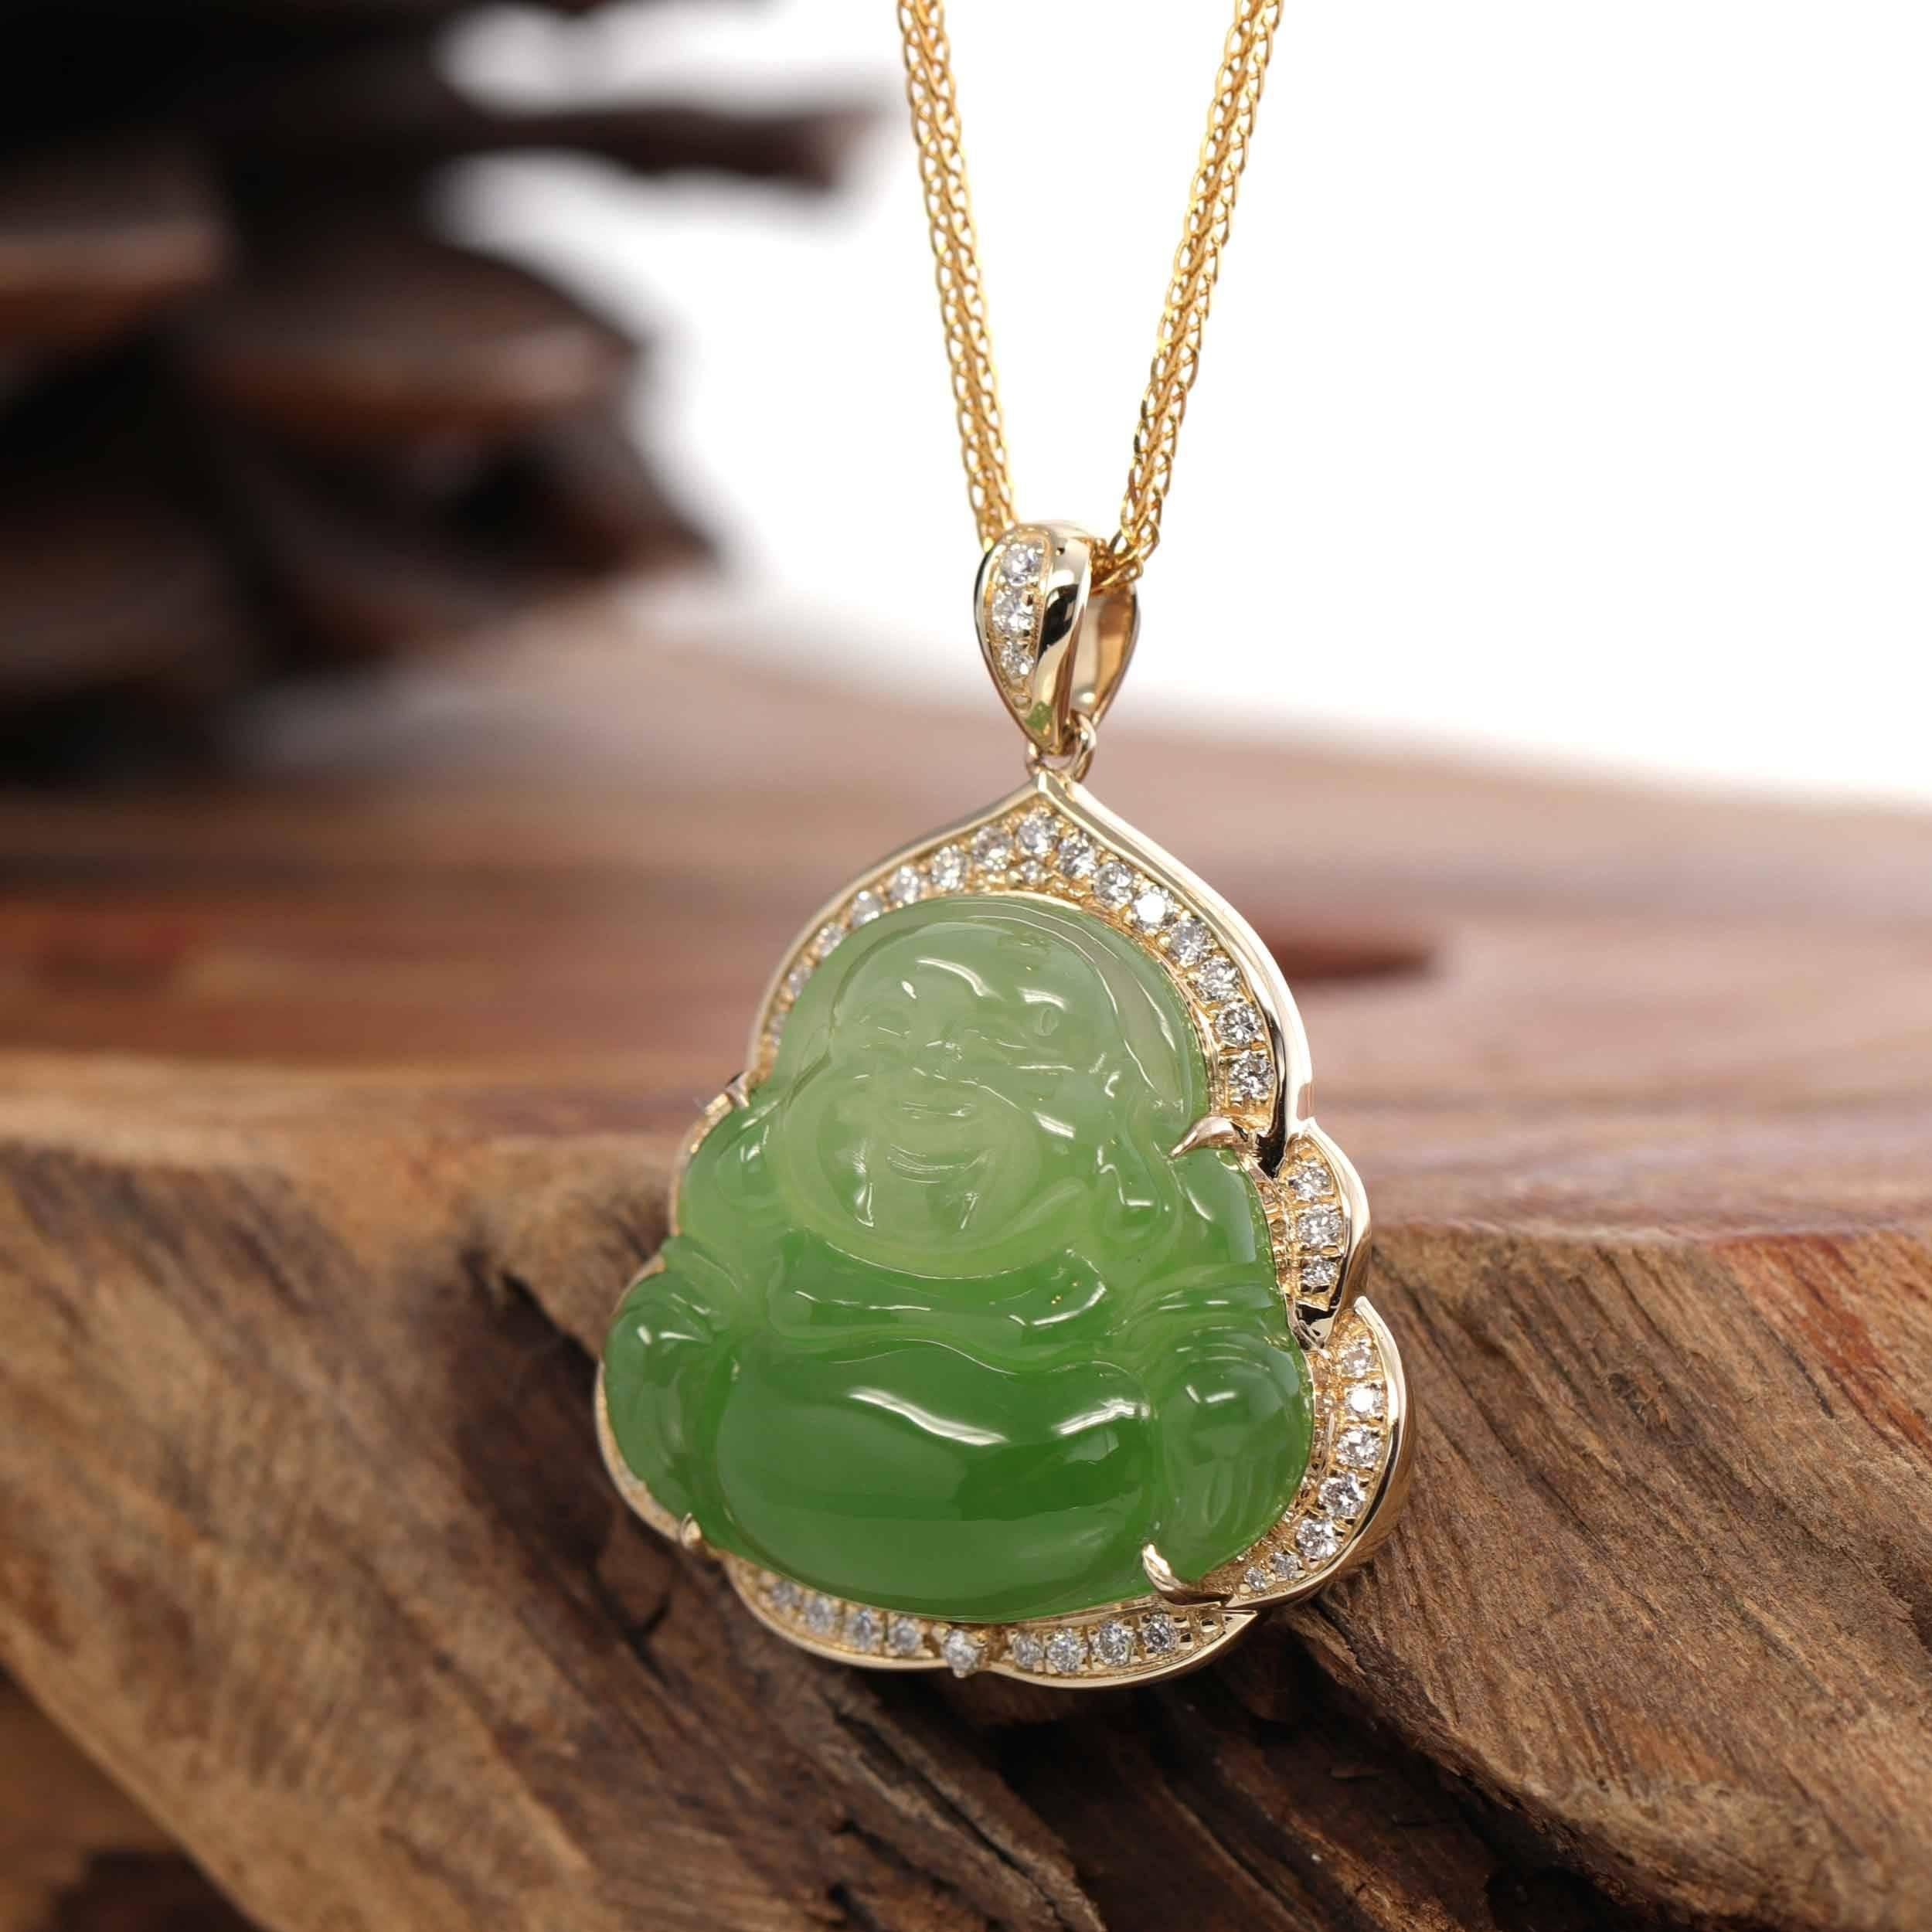 * INTRODUCTION---14k Yellow Gold & Genuine Apple Green Nephrite Jade Buddha Pendant Necklace With SI Diamonds Bail. The person who wears a Buddha pendant around the neck attracts positive energy. They emit positive waves into the environment around